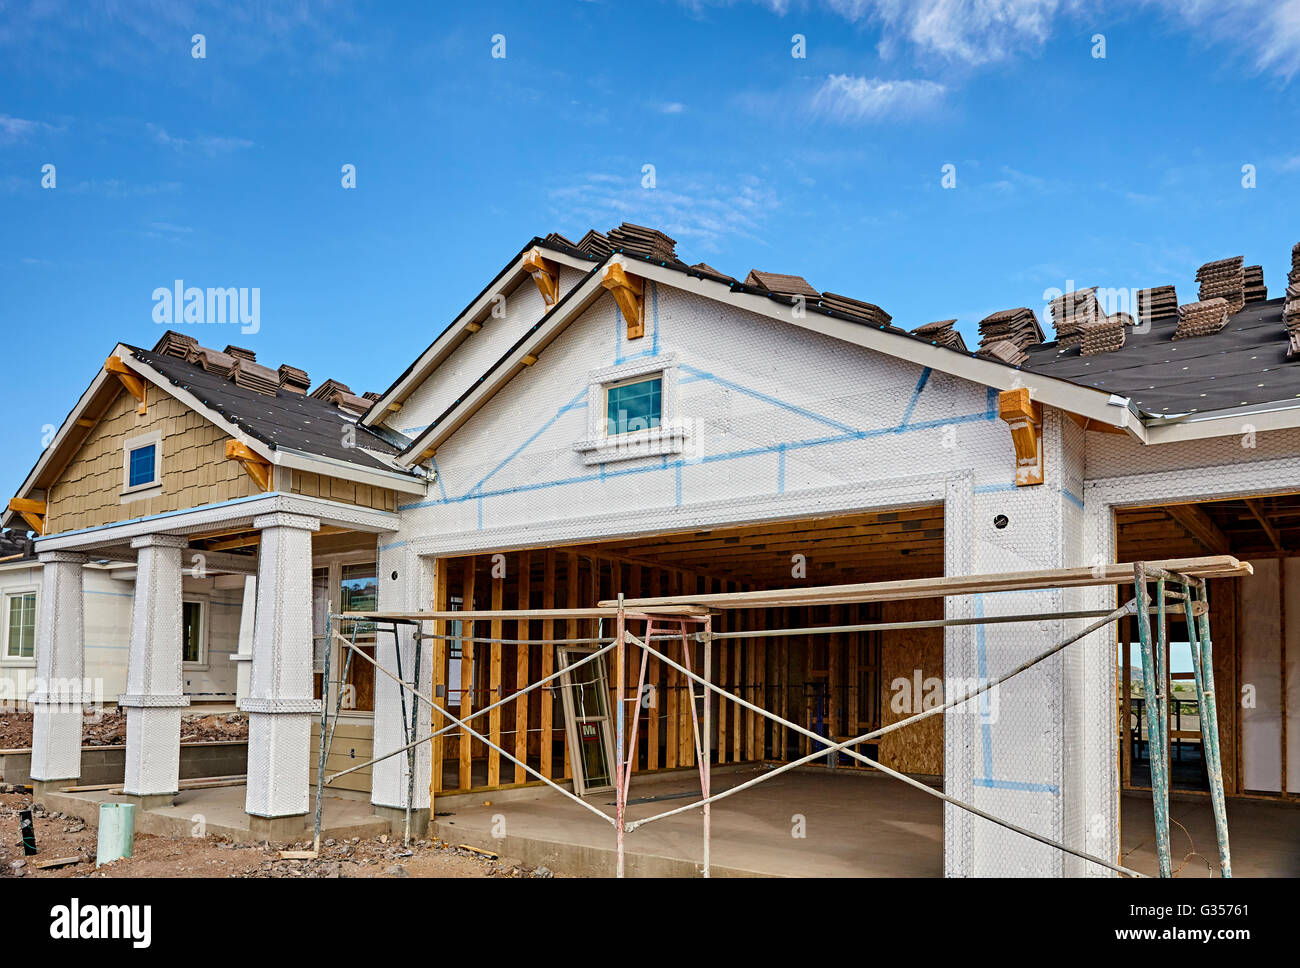 Home building industry house prep for stucco and tile roofing Stock Photo